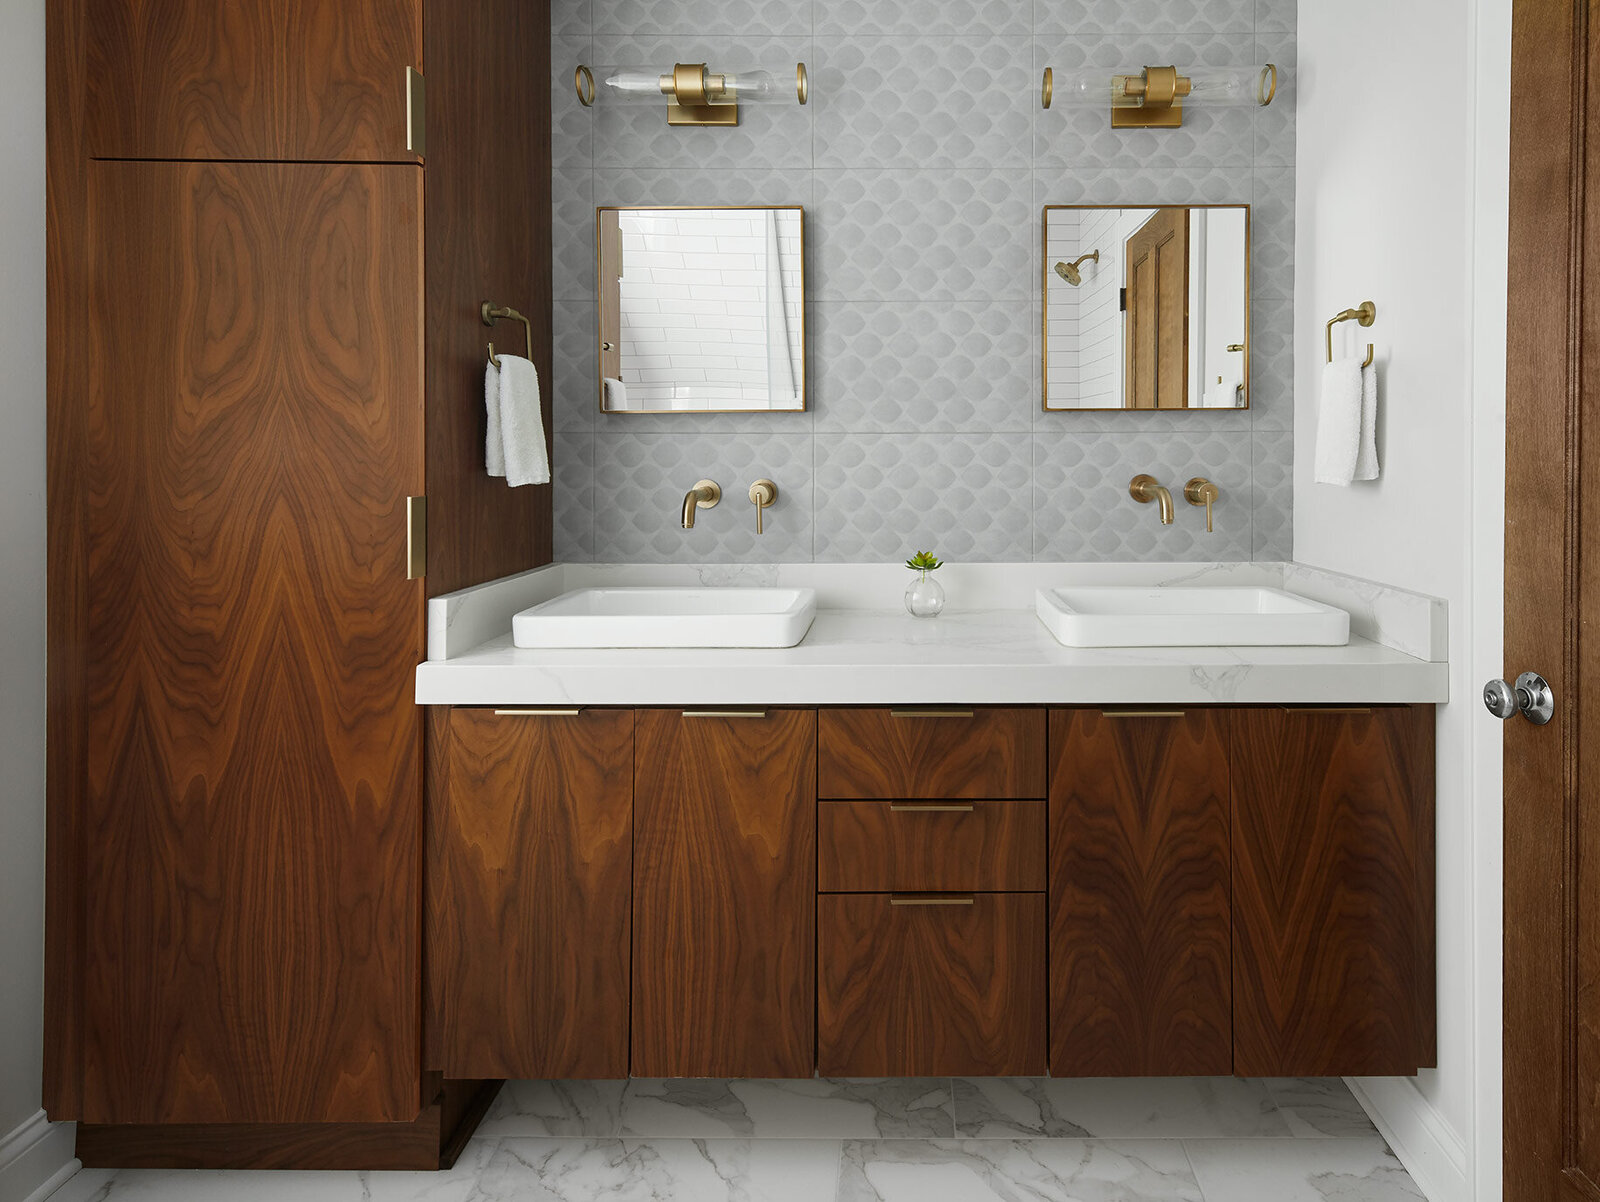 Midcentury bathroom with dark wooden cabinets and rectangular mirrors